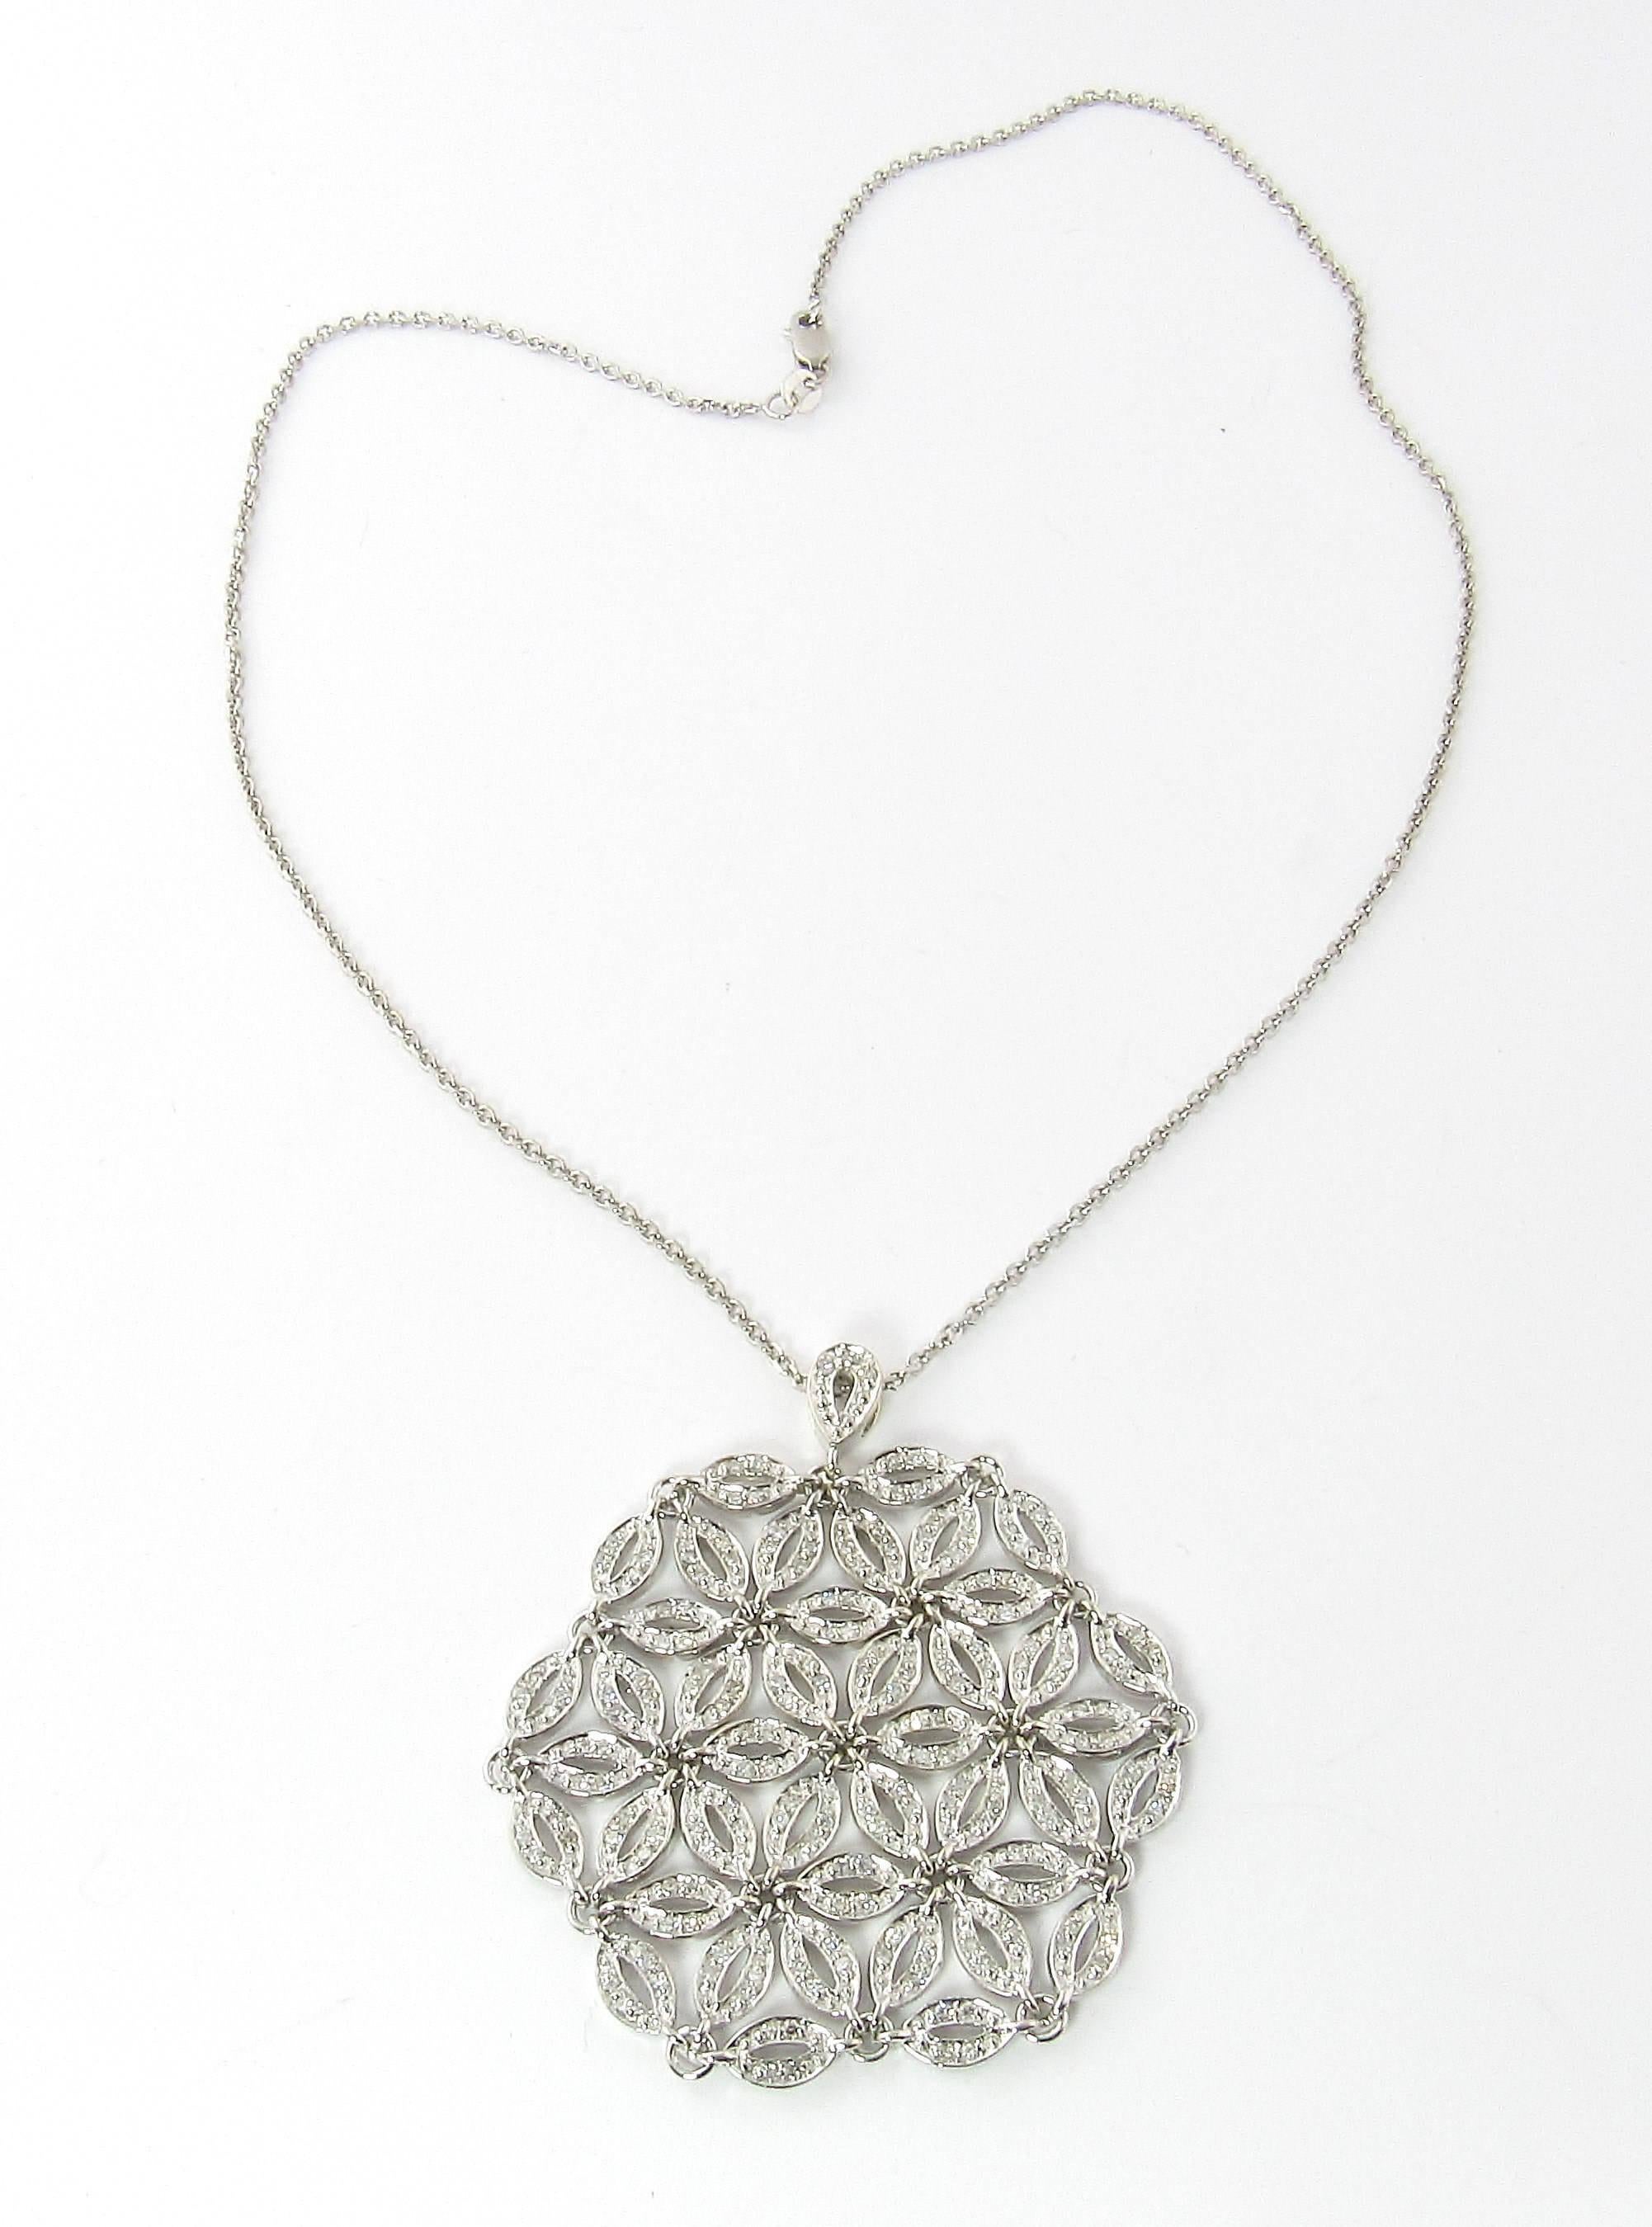 Vintage 14K White Gold and Diamond Large Floral Flexible Pendant Necklace

This unique necklace is in the shape of a snowflake with a floral pattern throughout.

The diamond ovals are all chain linked giving a flexible mesh feel to the